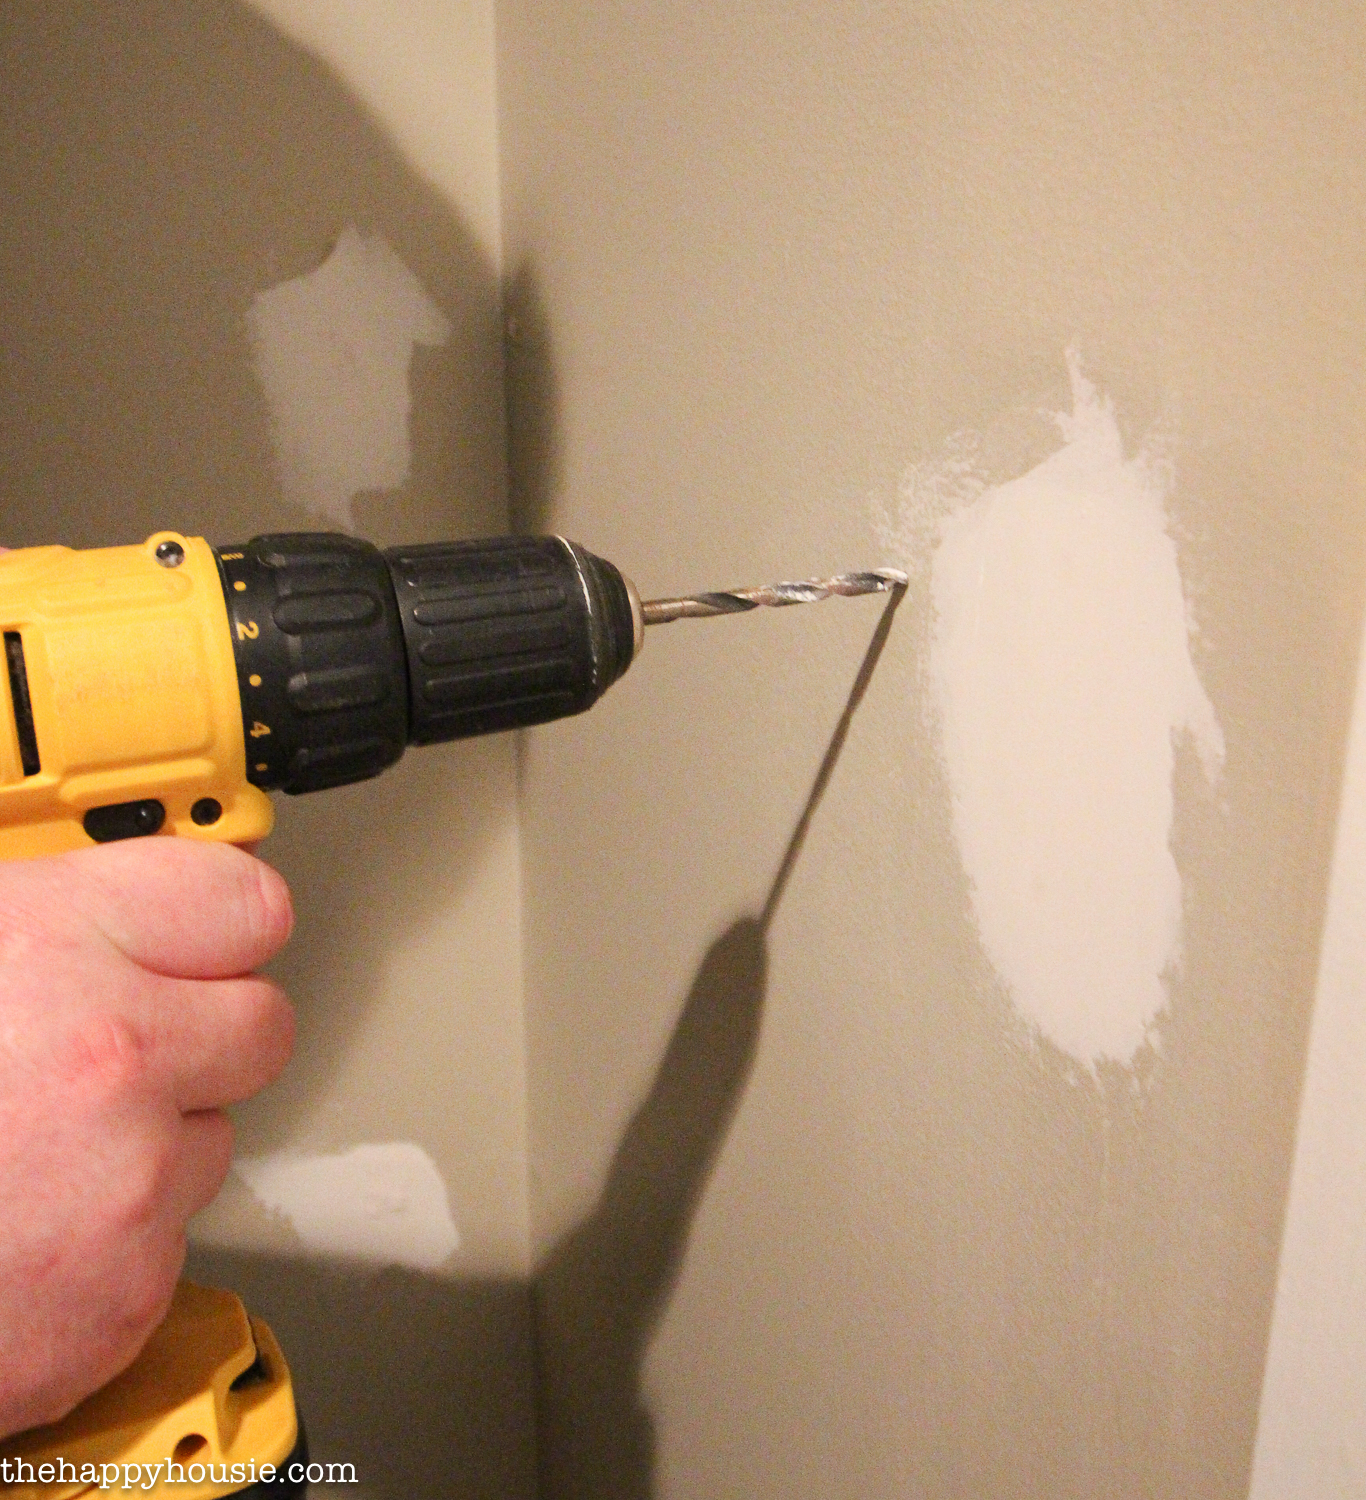 Drilling into the wall.